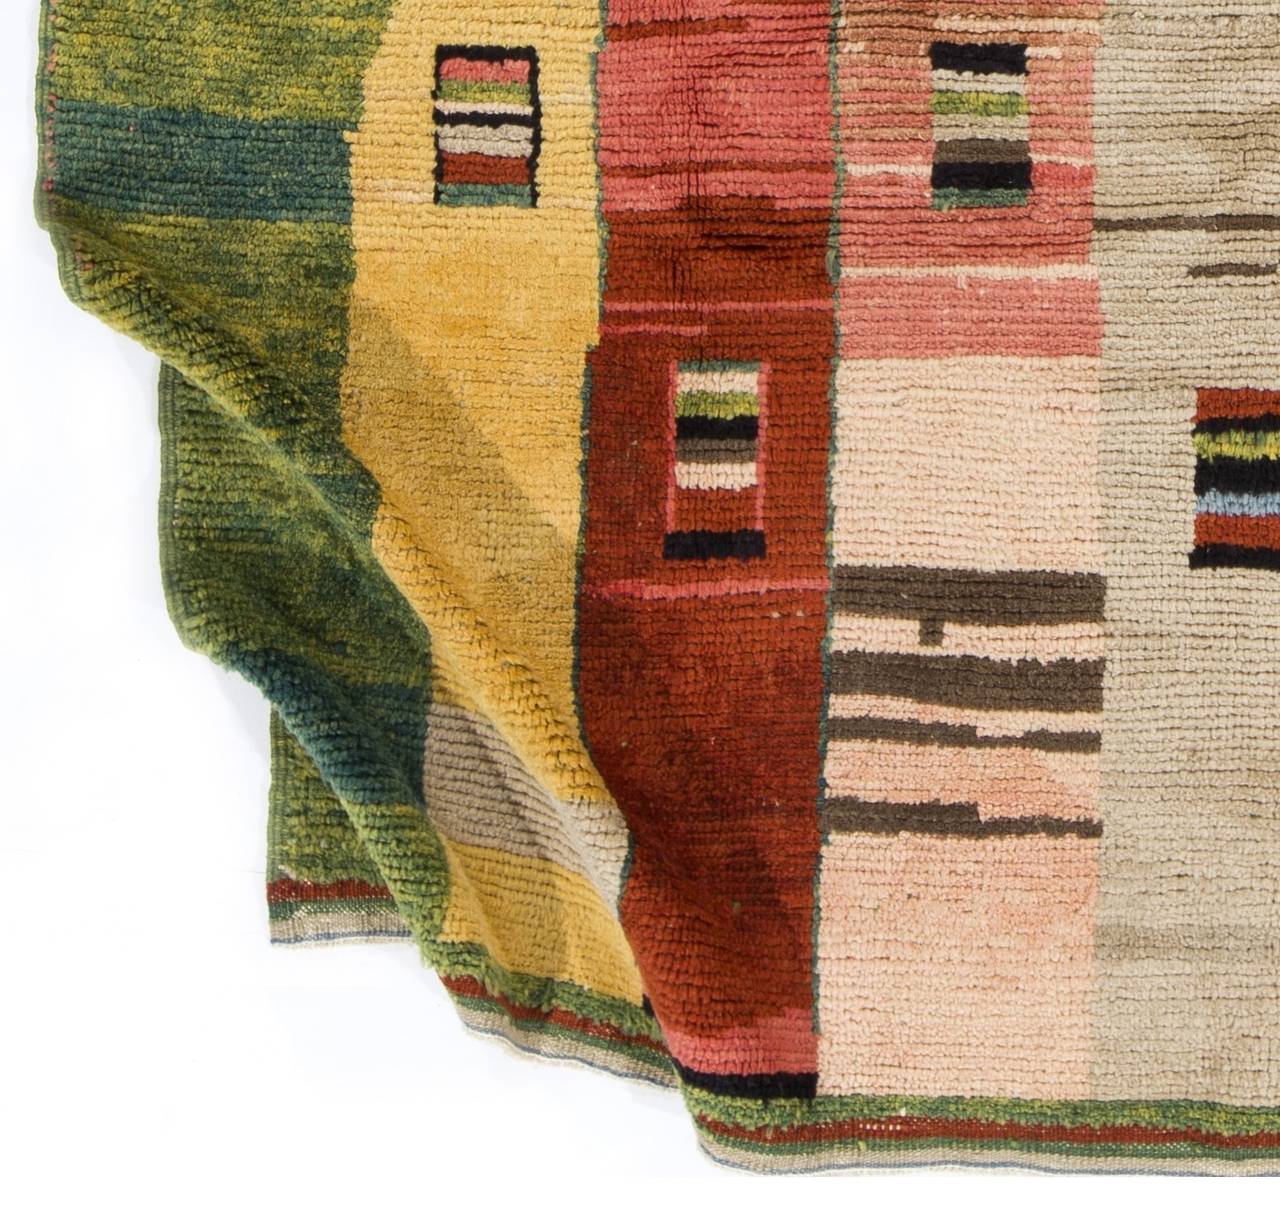 A colorful modern hand-knotted rug from Central Turkey with a soft, organic lambs' wool pile, which is durable, cozy and comfortable. The rug itself features a modern design of striated color blocks in soft yellow, tomato red, salmon pink and